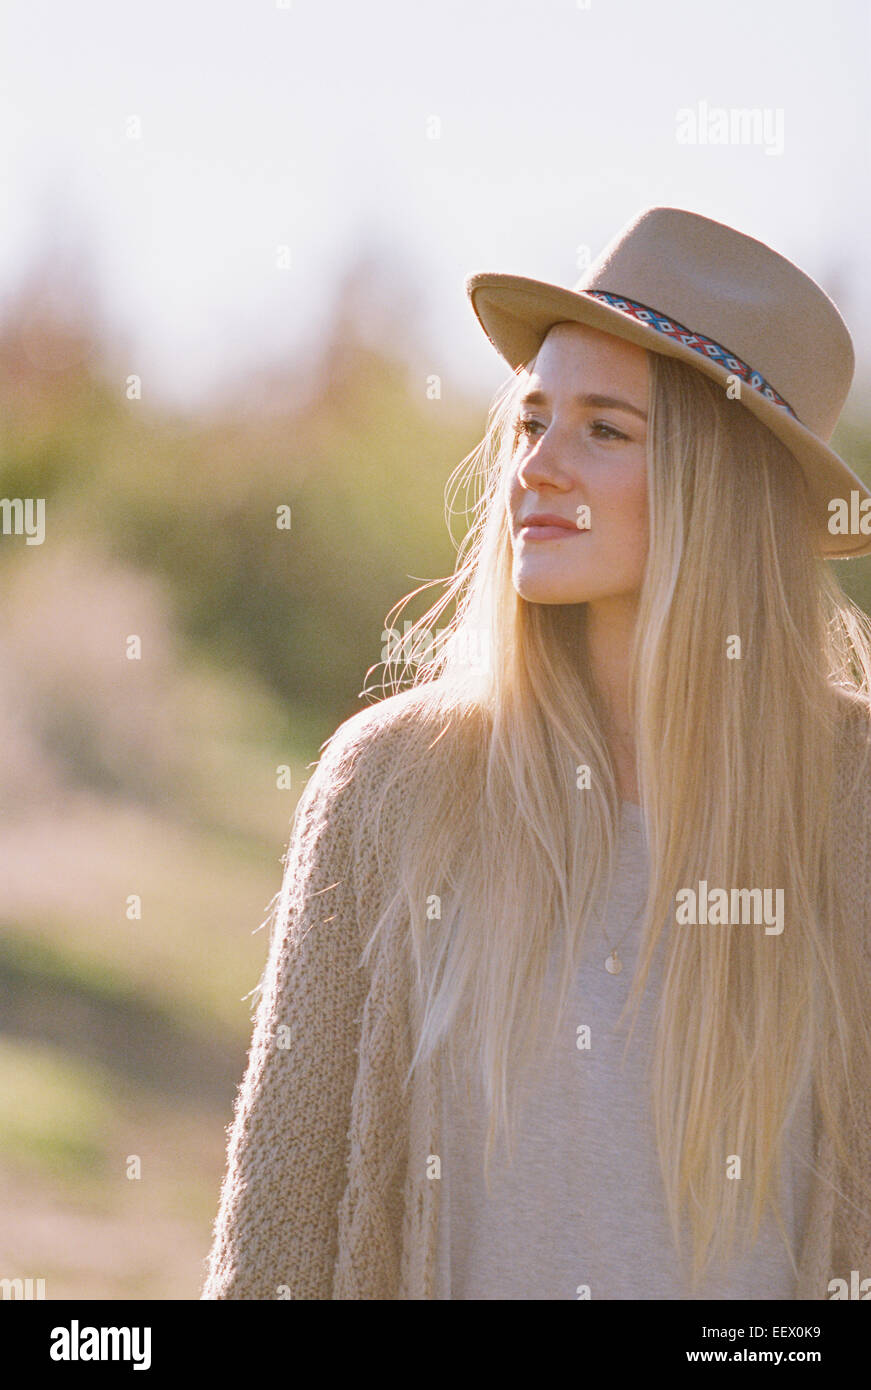 Woman with long blond hair, wearing a hat. Stock Photo